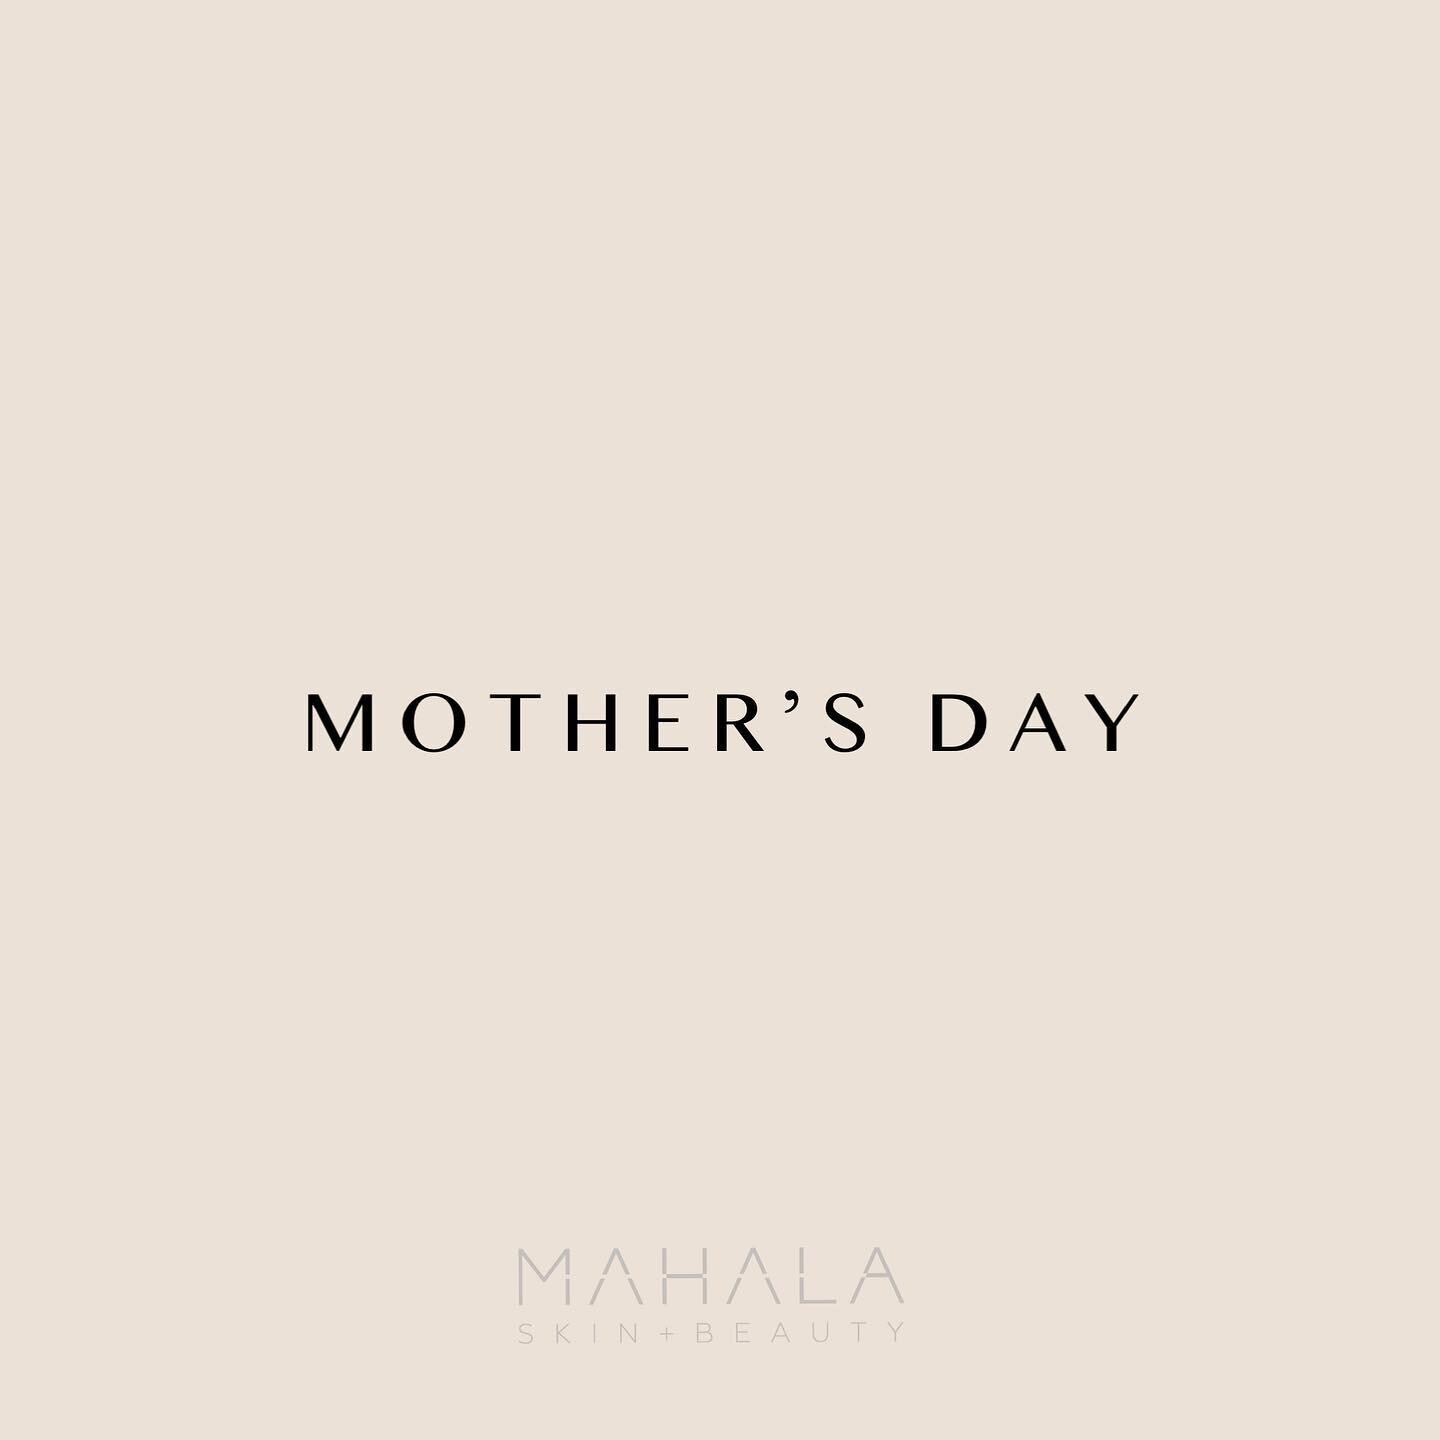 Spoil someone you love this Mother&rsquo;s Day with the gift of pampering. 

REFRESH // $120
Power Facial + Mini Manicure
save $20 / 90 mins

RENEWAL // $160 
Back Massage + Dermalogica Facial⠀ 
save $20 / 90 mins

GIFT VOUCHERS AVAILABLE IN STORE OR